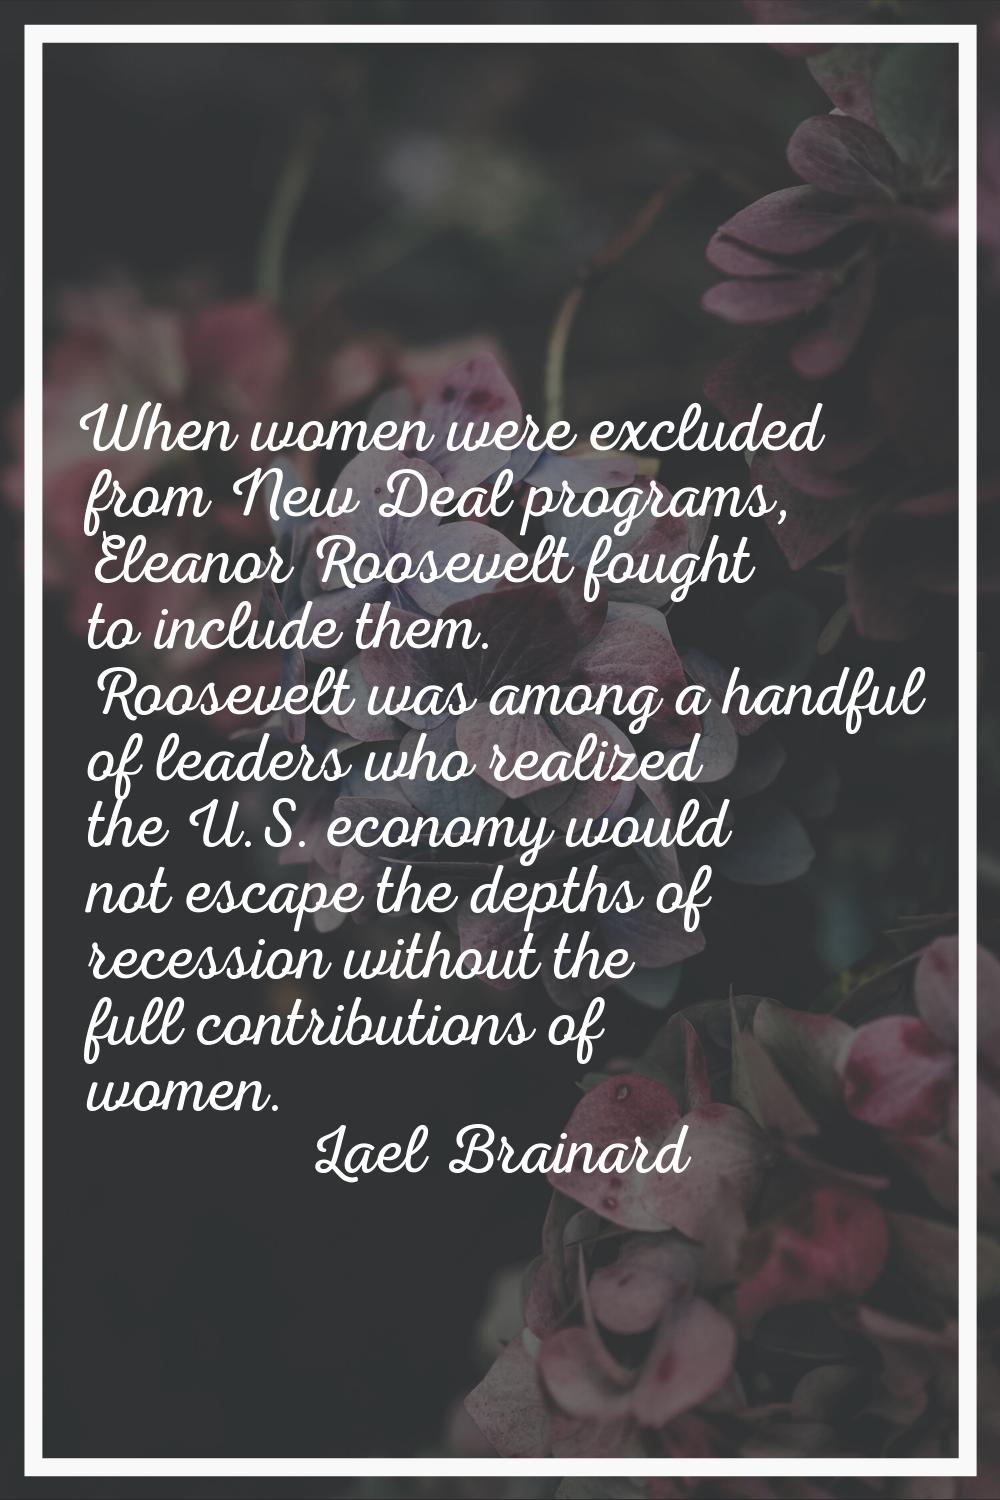 When women were excluded from New Deal programs, Eleanor Roosevelt fought to include them. Roosevel